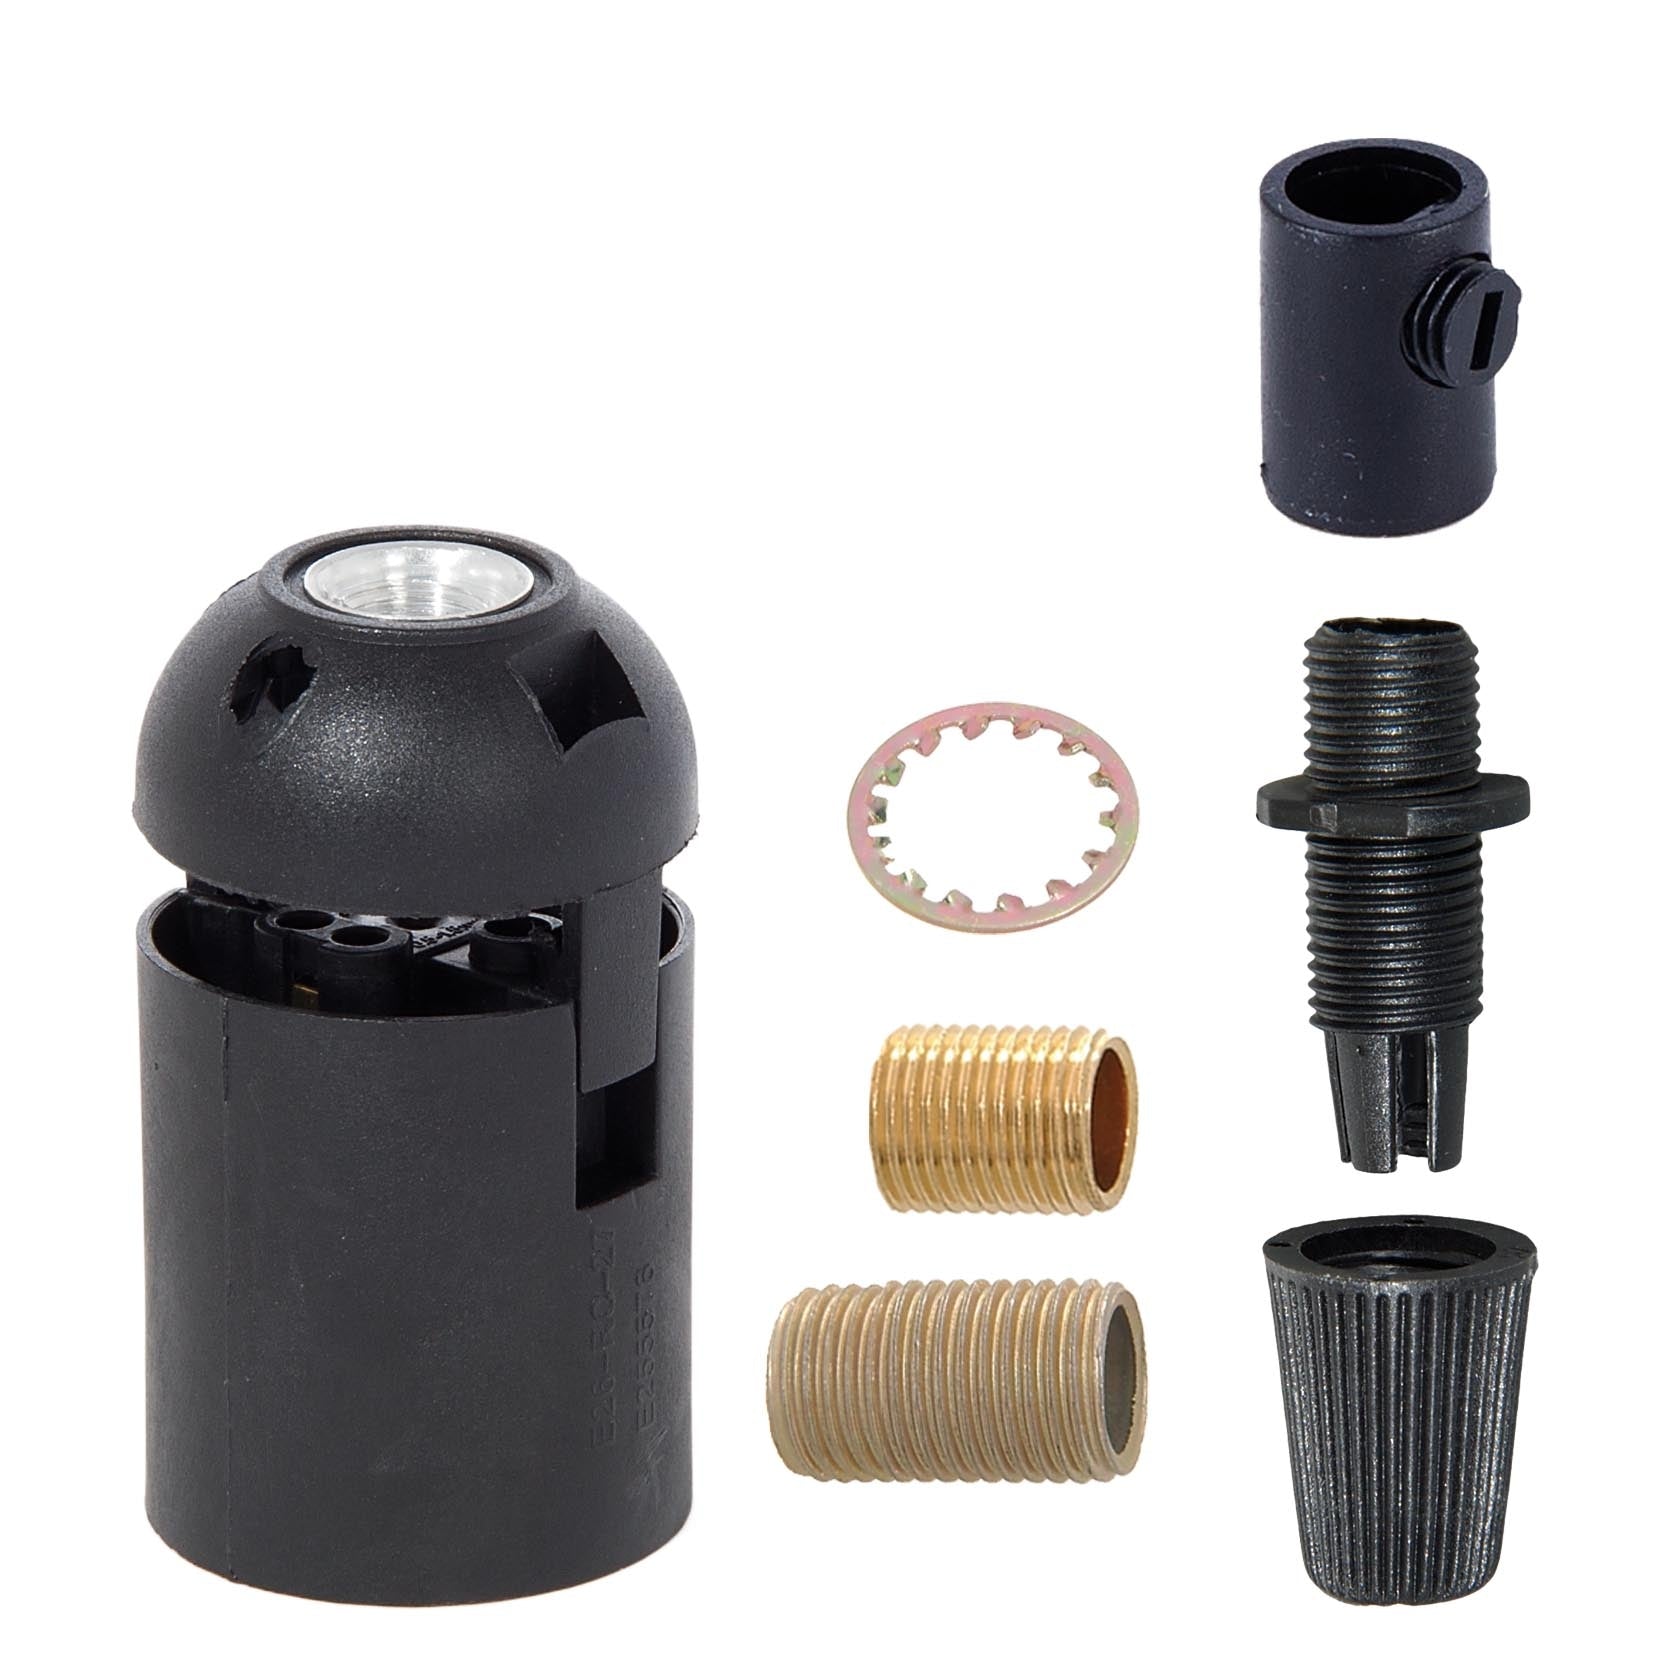 Polished Copper Finish Steel E-26 Lamp Socket Cup with COMPLETE with Socket and Mounting Hardware